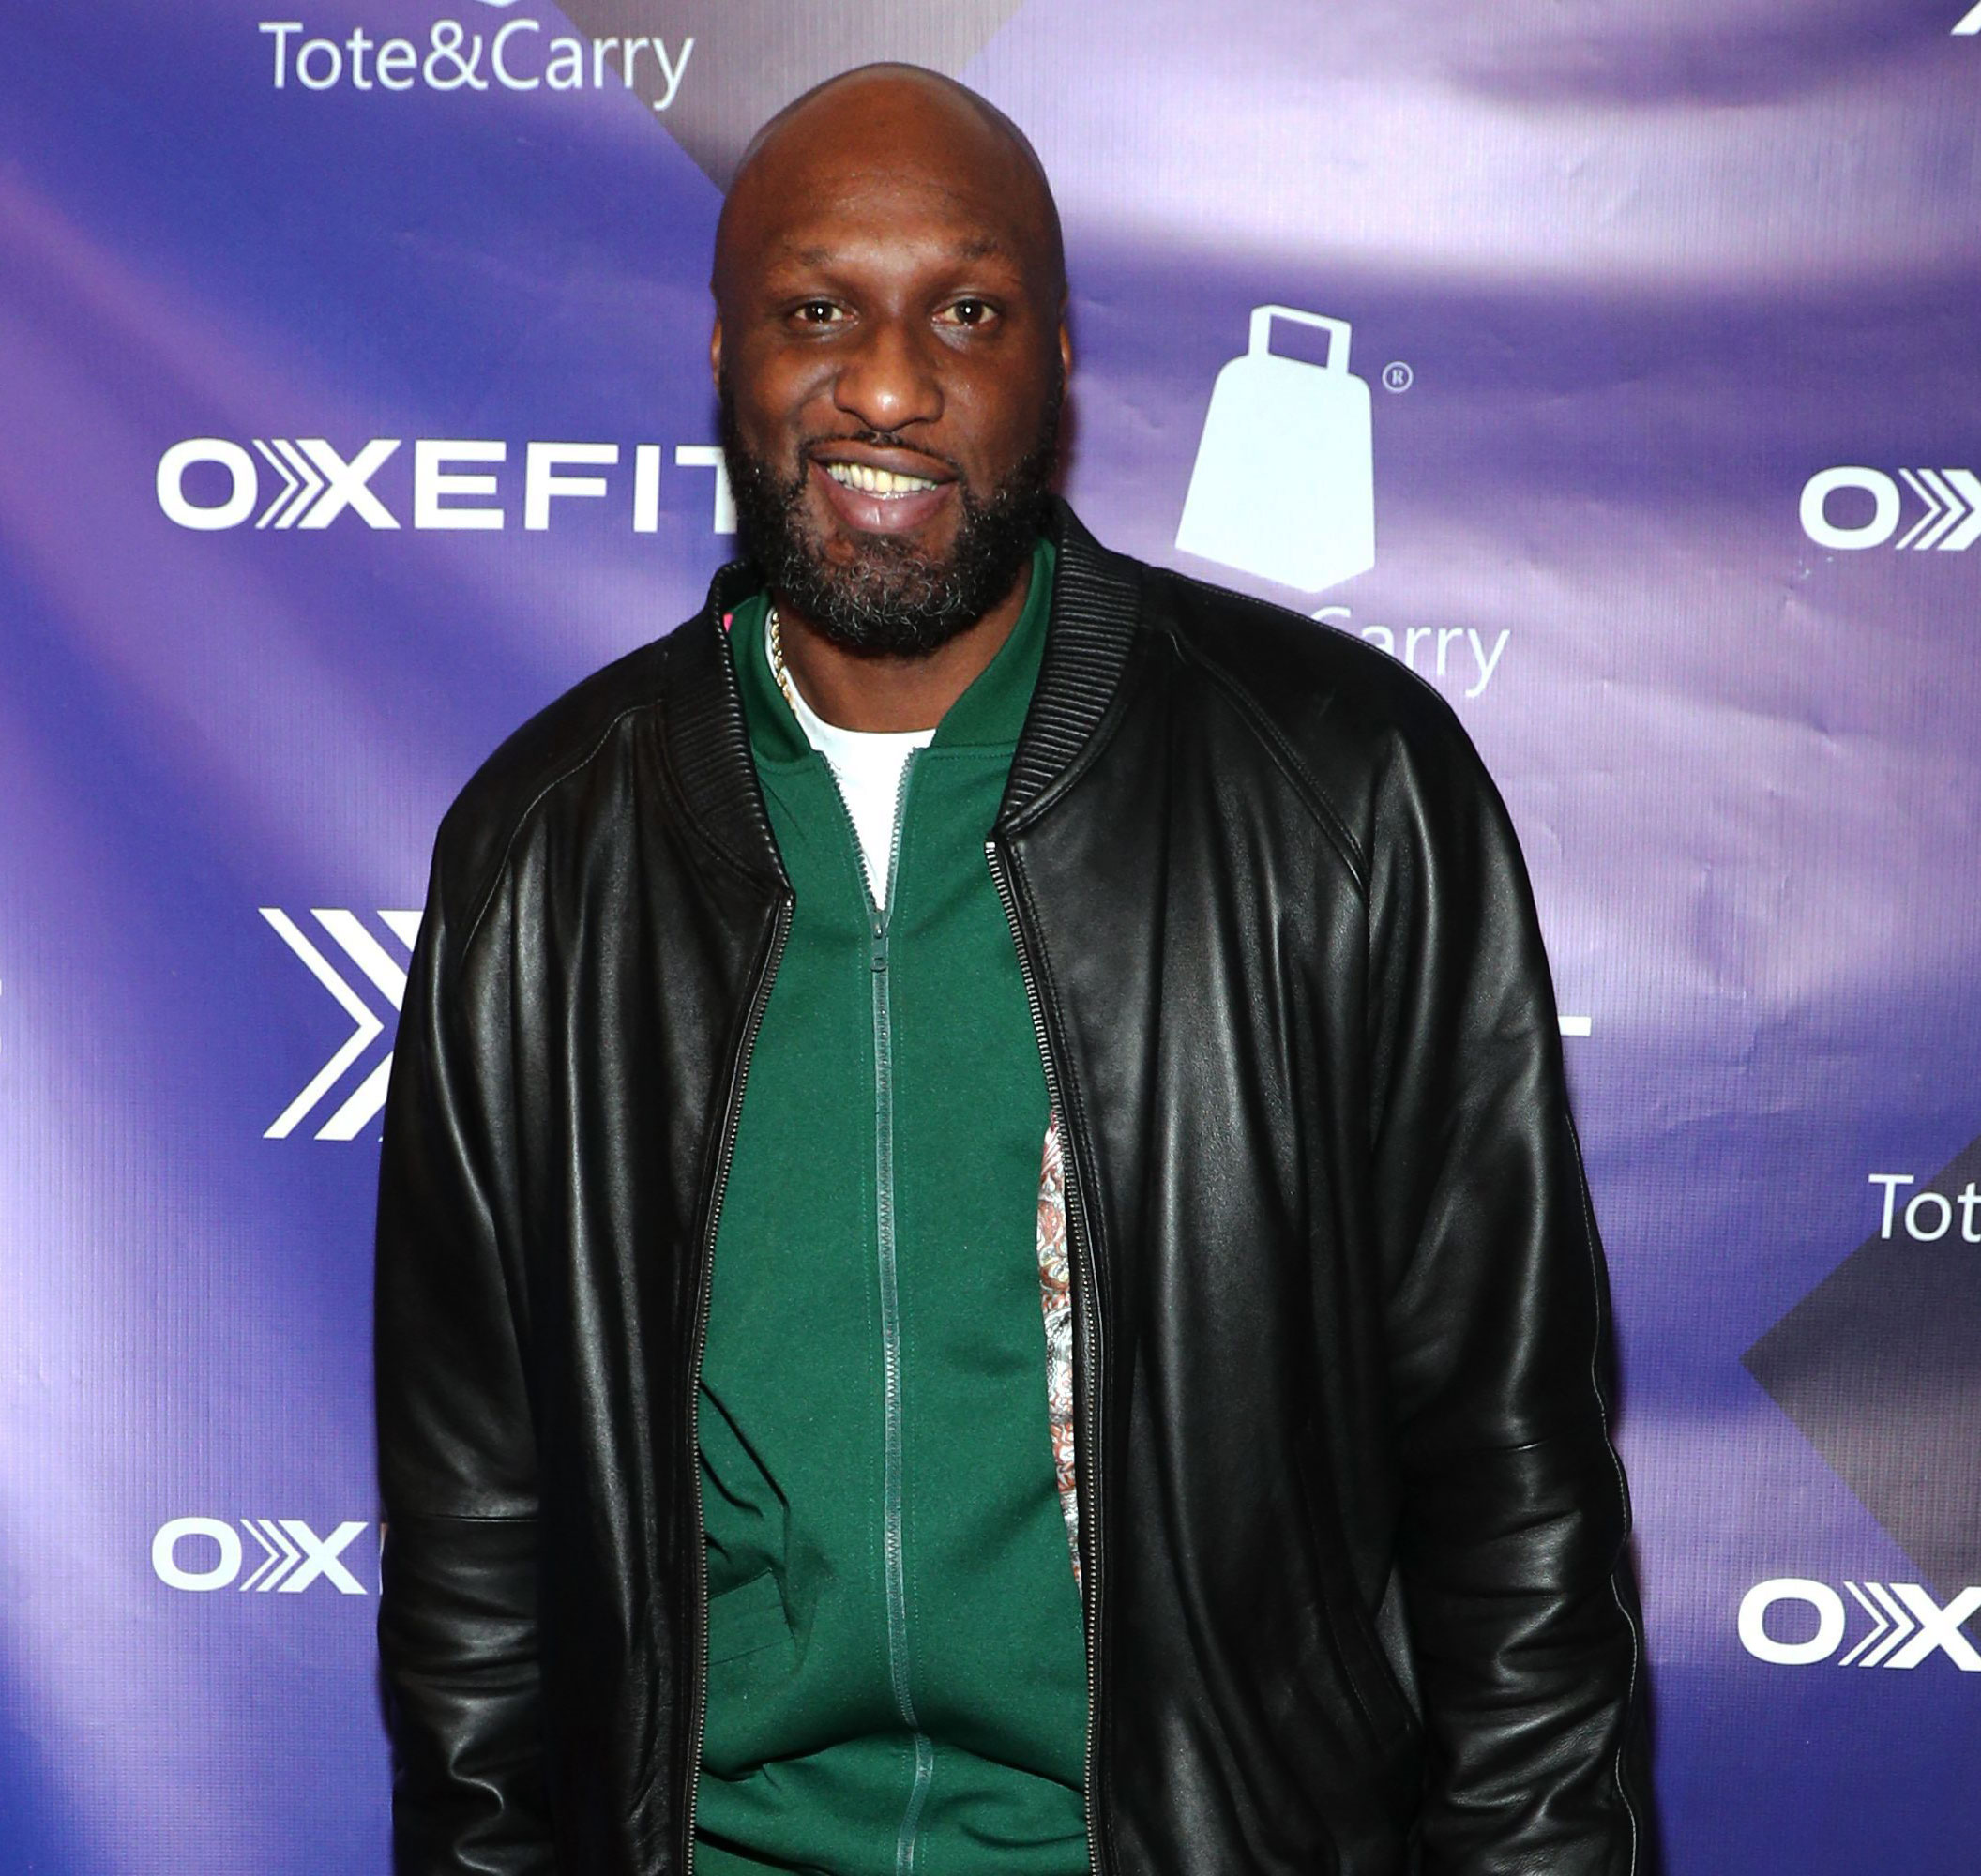 Lamar Odom Im Too Shy to Ask Ex Khloe Kardashian to Dinner picture image